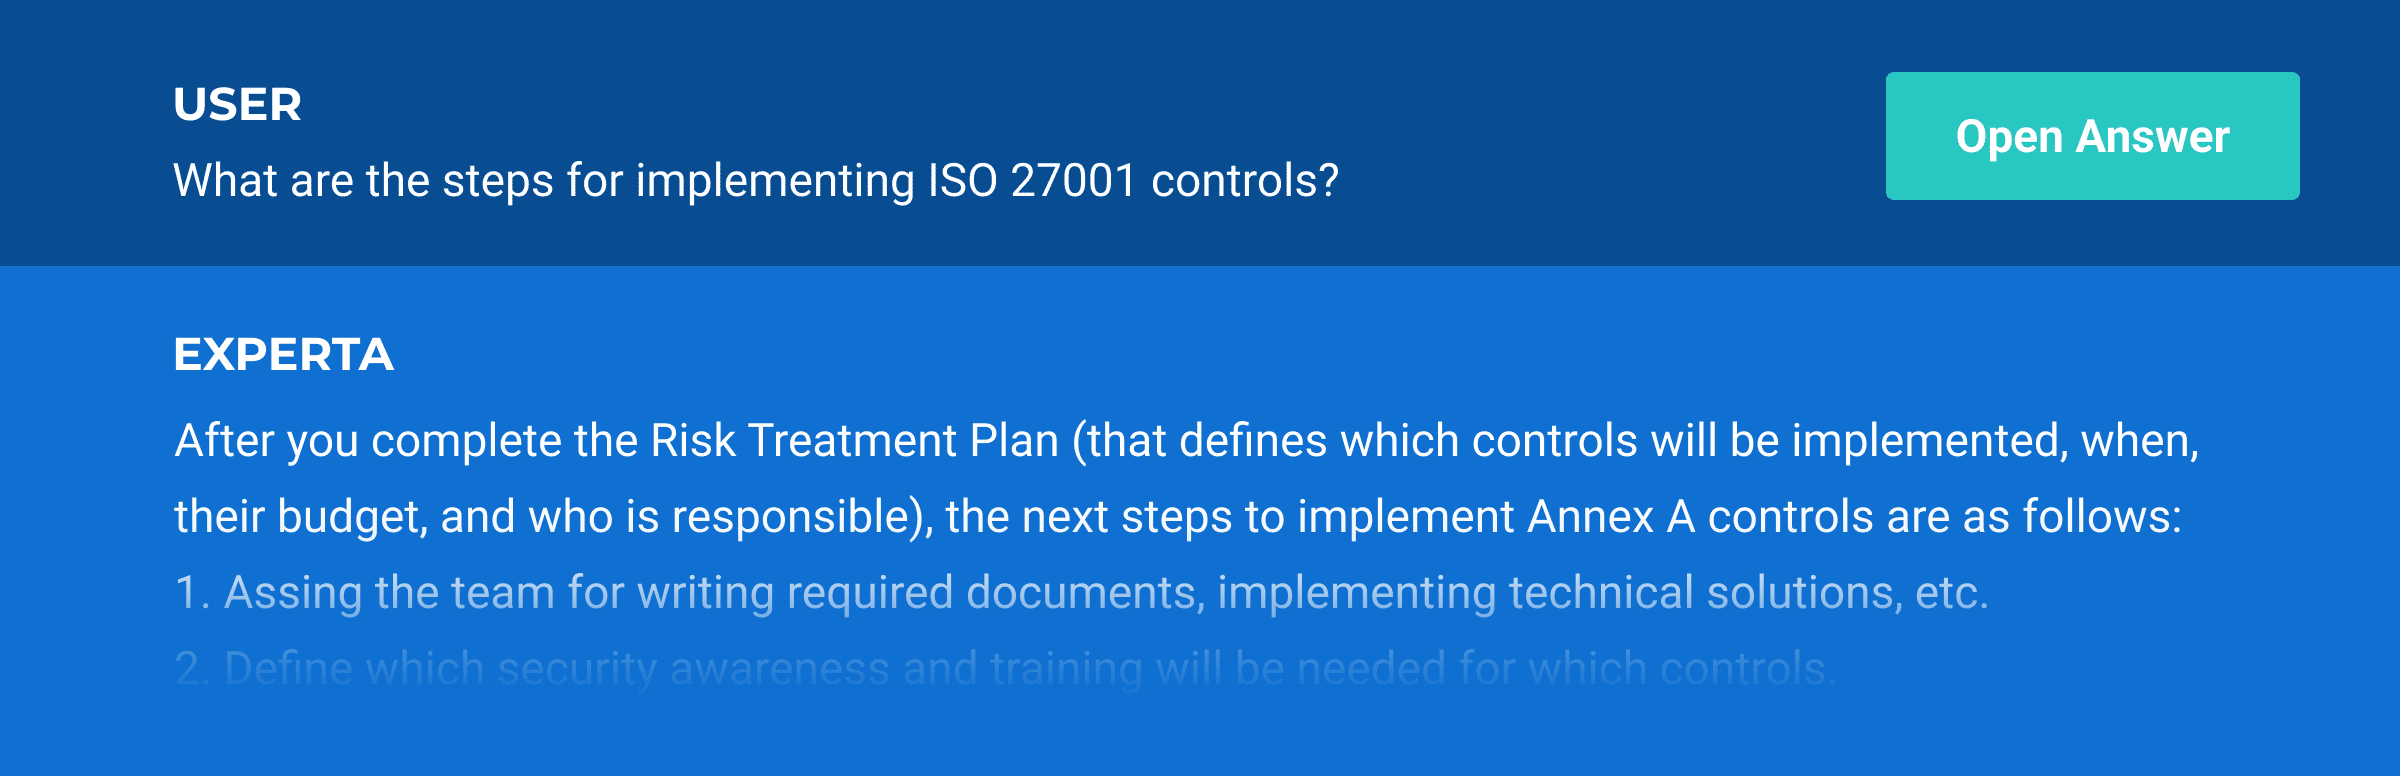 How to implement ISO 27001 Annex A controls by using AI - 27001Academy